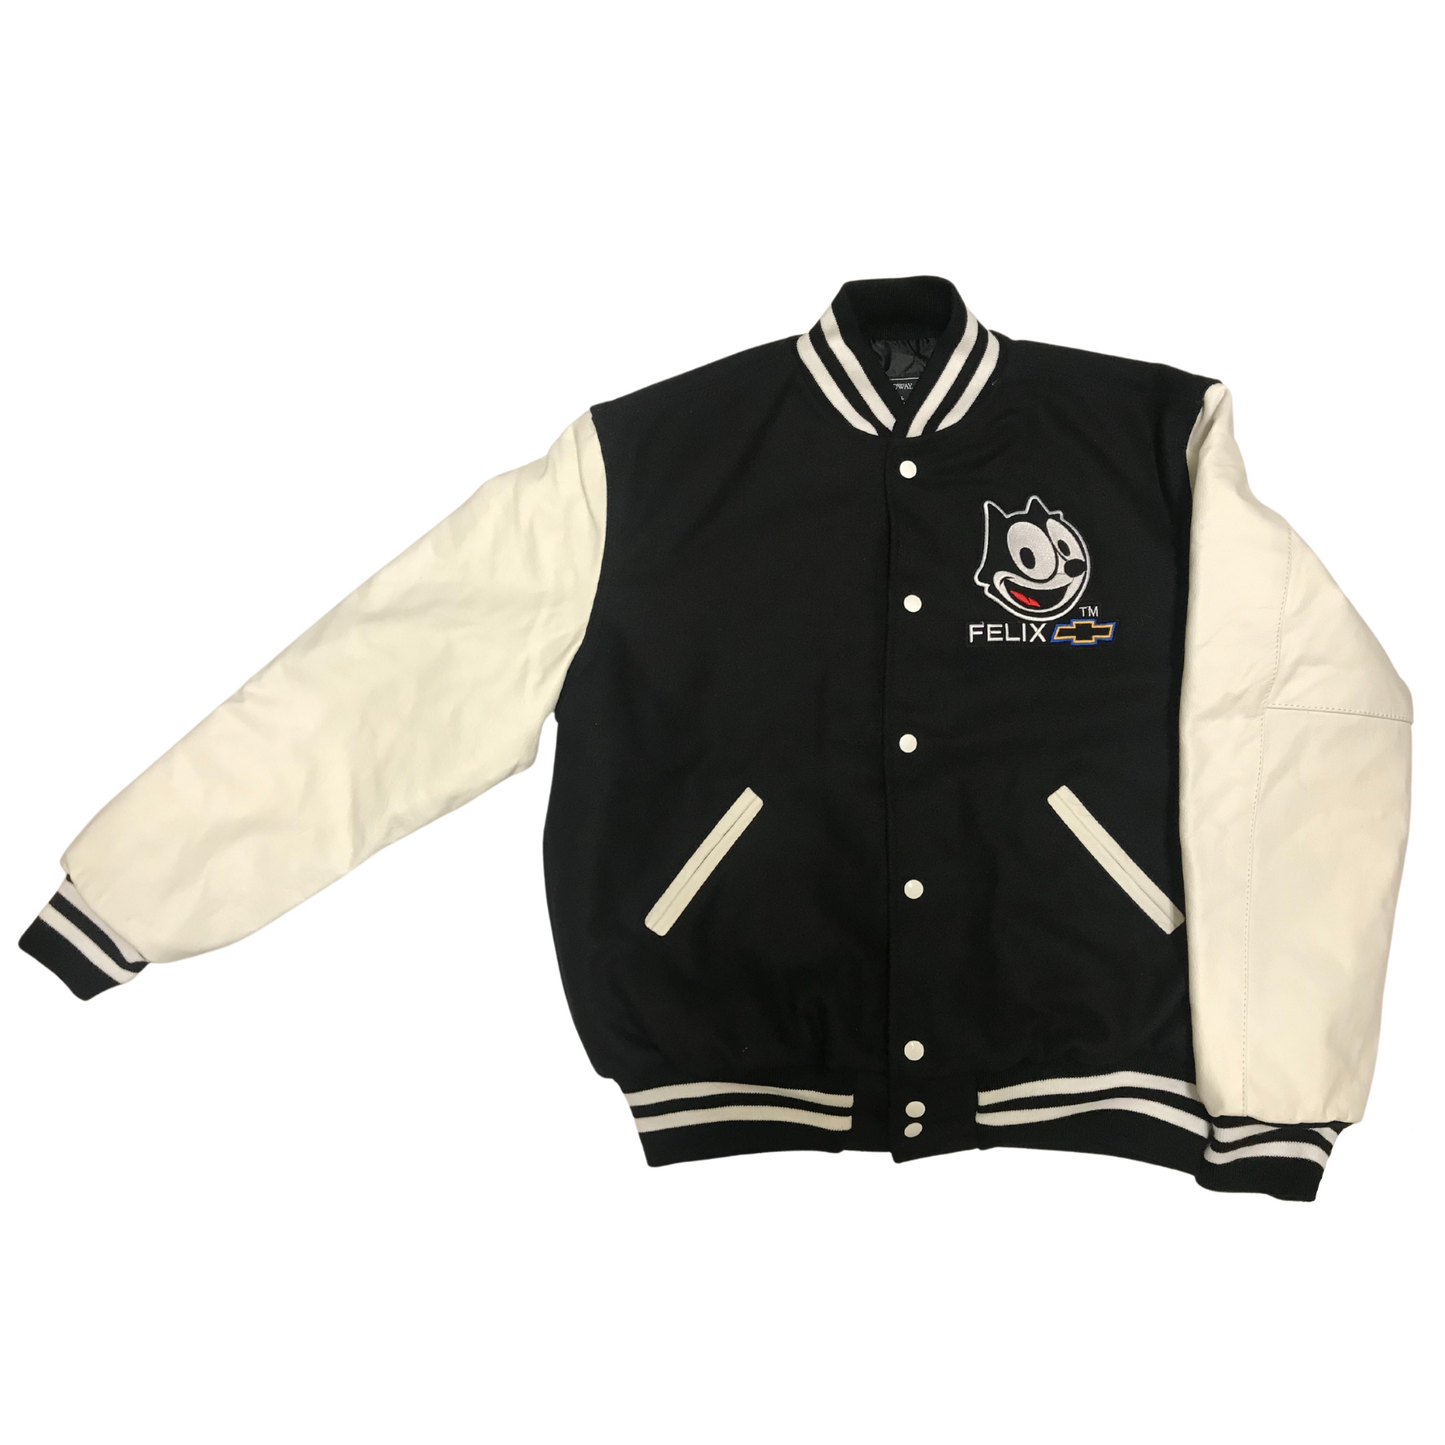 Felix Chevrolet Letterman Jacket With Genuine White Leather Sleeves